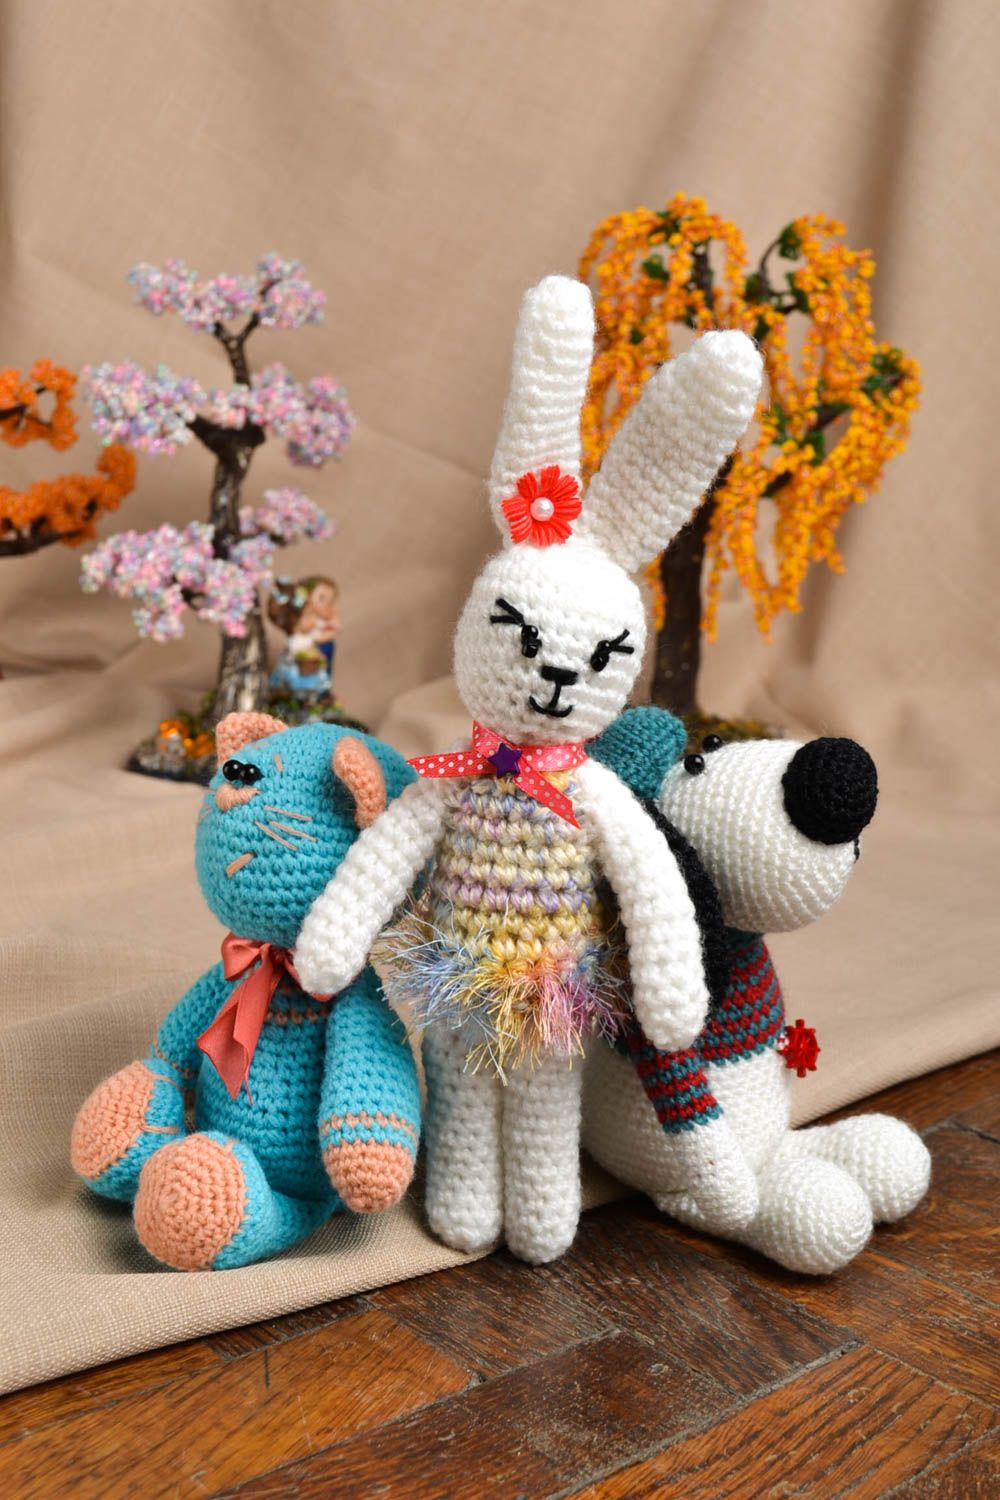 Handmade crocheted toys for kids crocheted toys interior toy present for baby photo 1